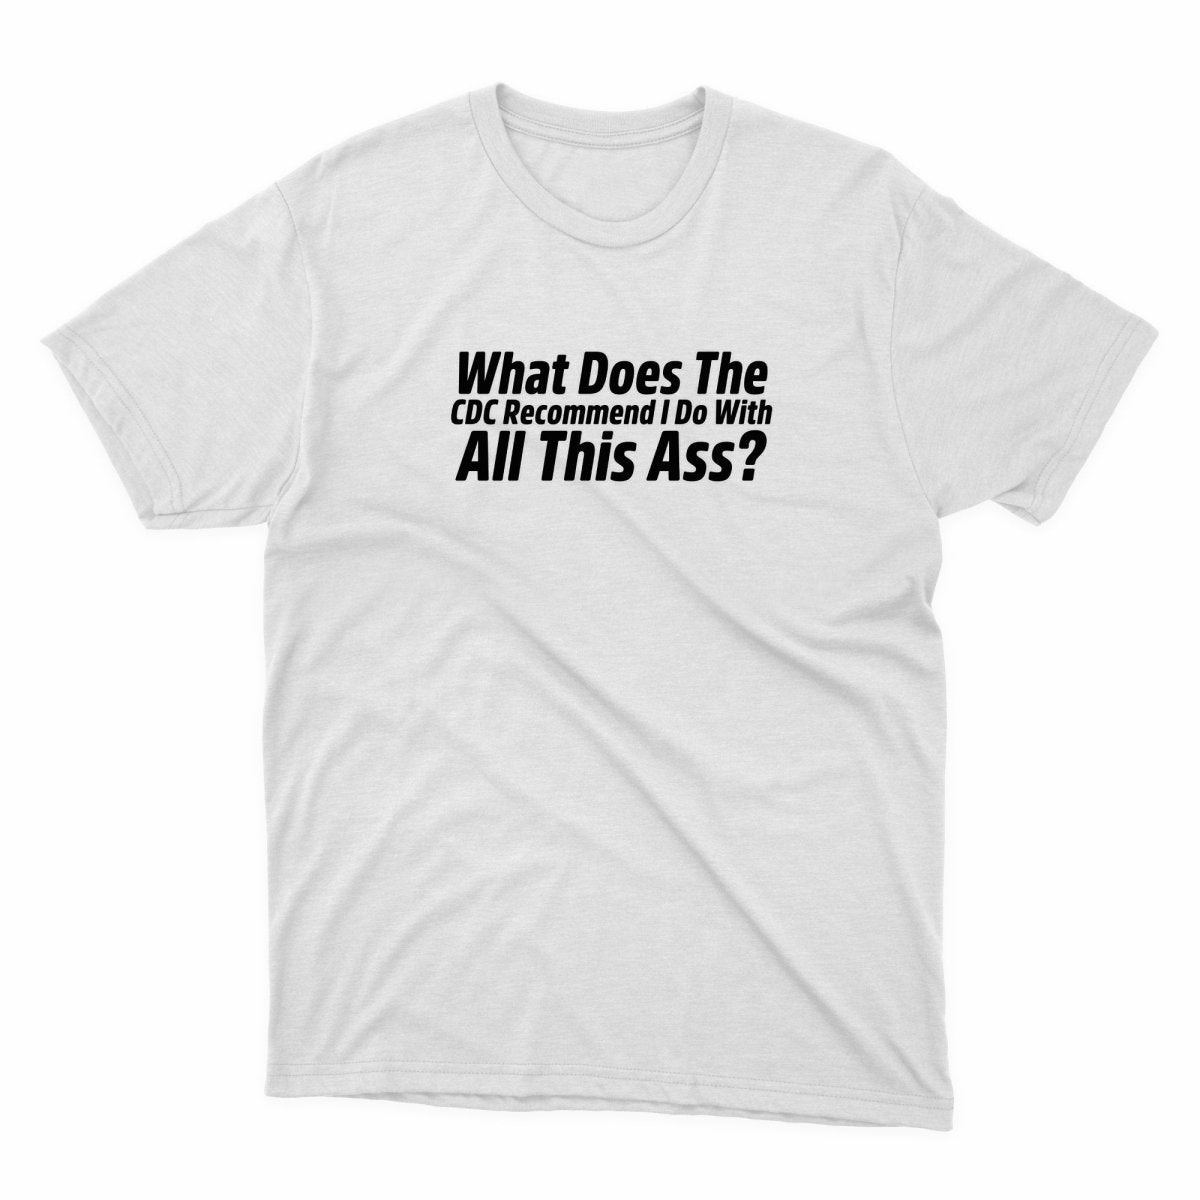 What Does The CDC Recomend Shirt - stickerbullWhat Does The CDC Recomend ShirtShirtsPrintifystickerbull16503492141315131440WhiteSa white t - shirt that says what does the cet recommend to with all